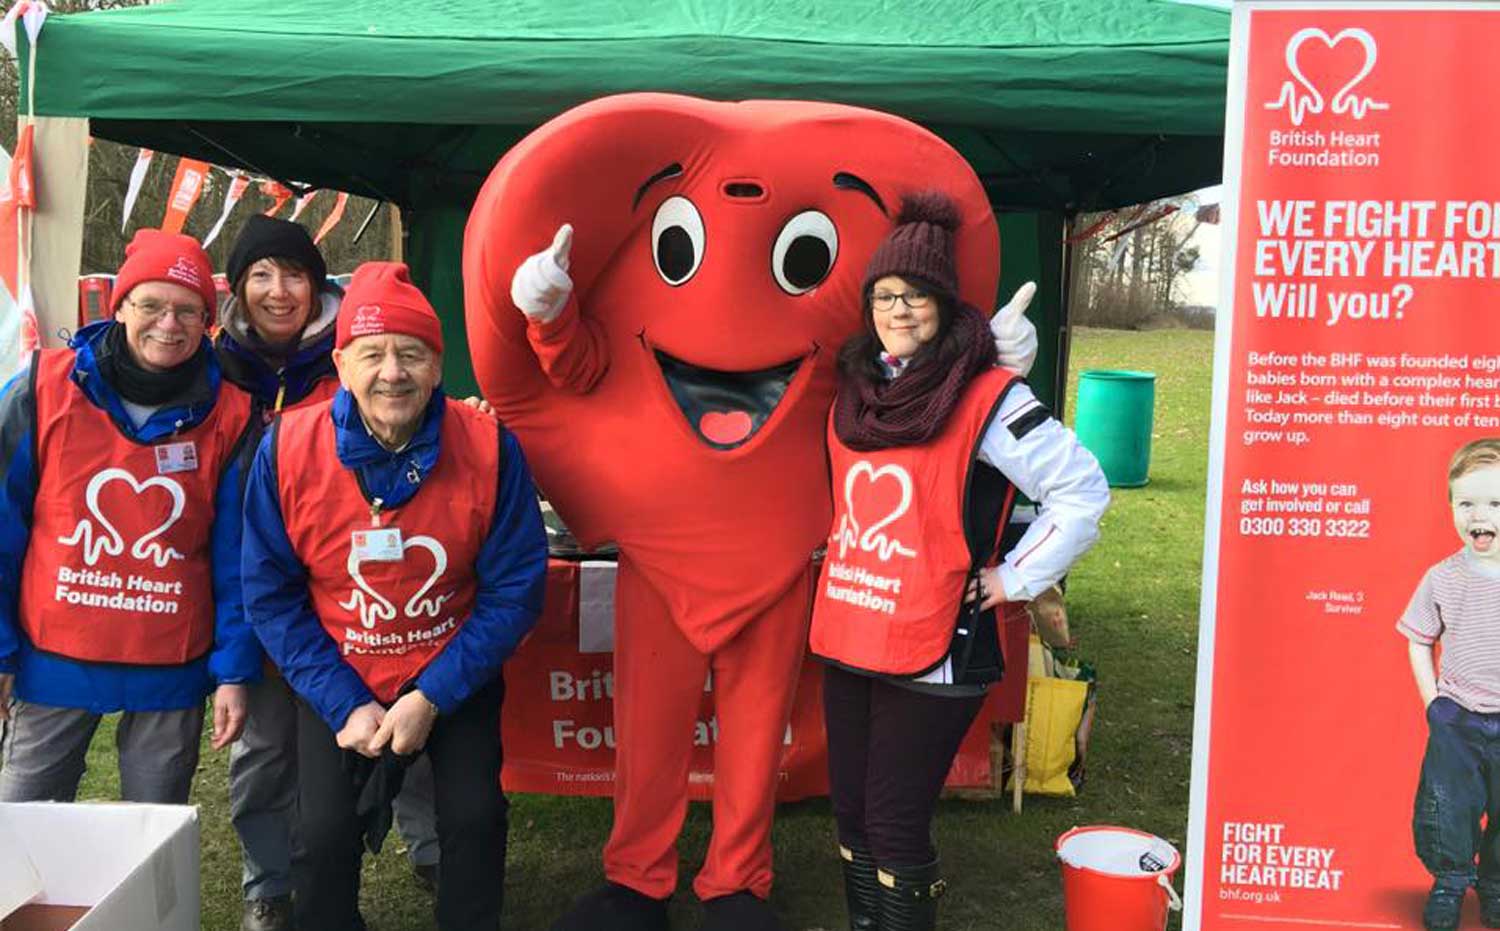 The British Heart Foundation (BHF) is calling on the people of Harrogate to help accelerate the fight against heart disease by joining their local fundraising group and raising money for lifesaving research